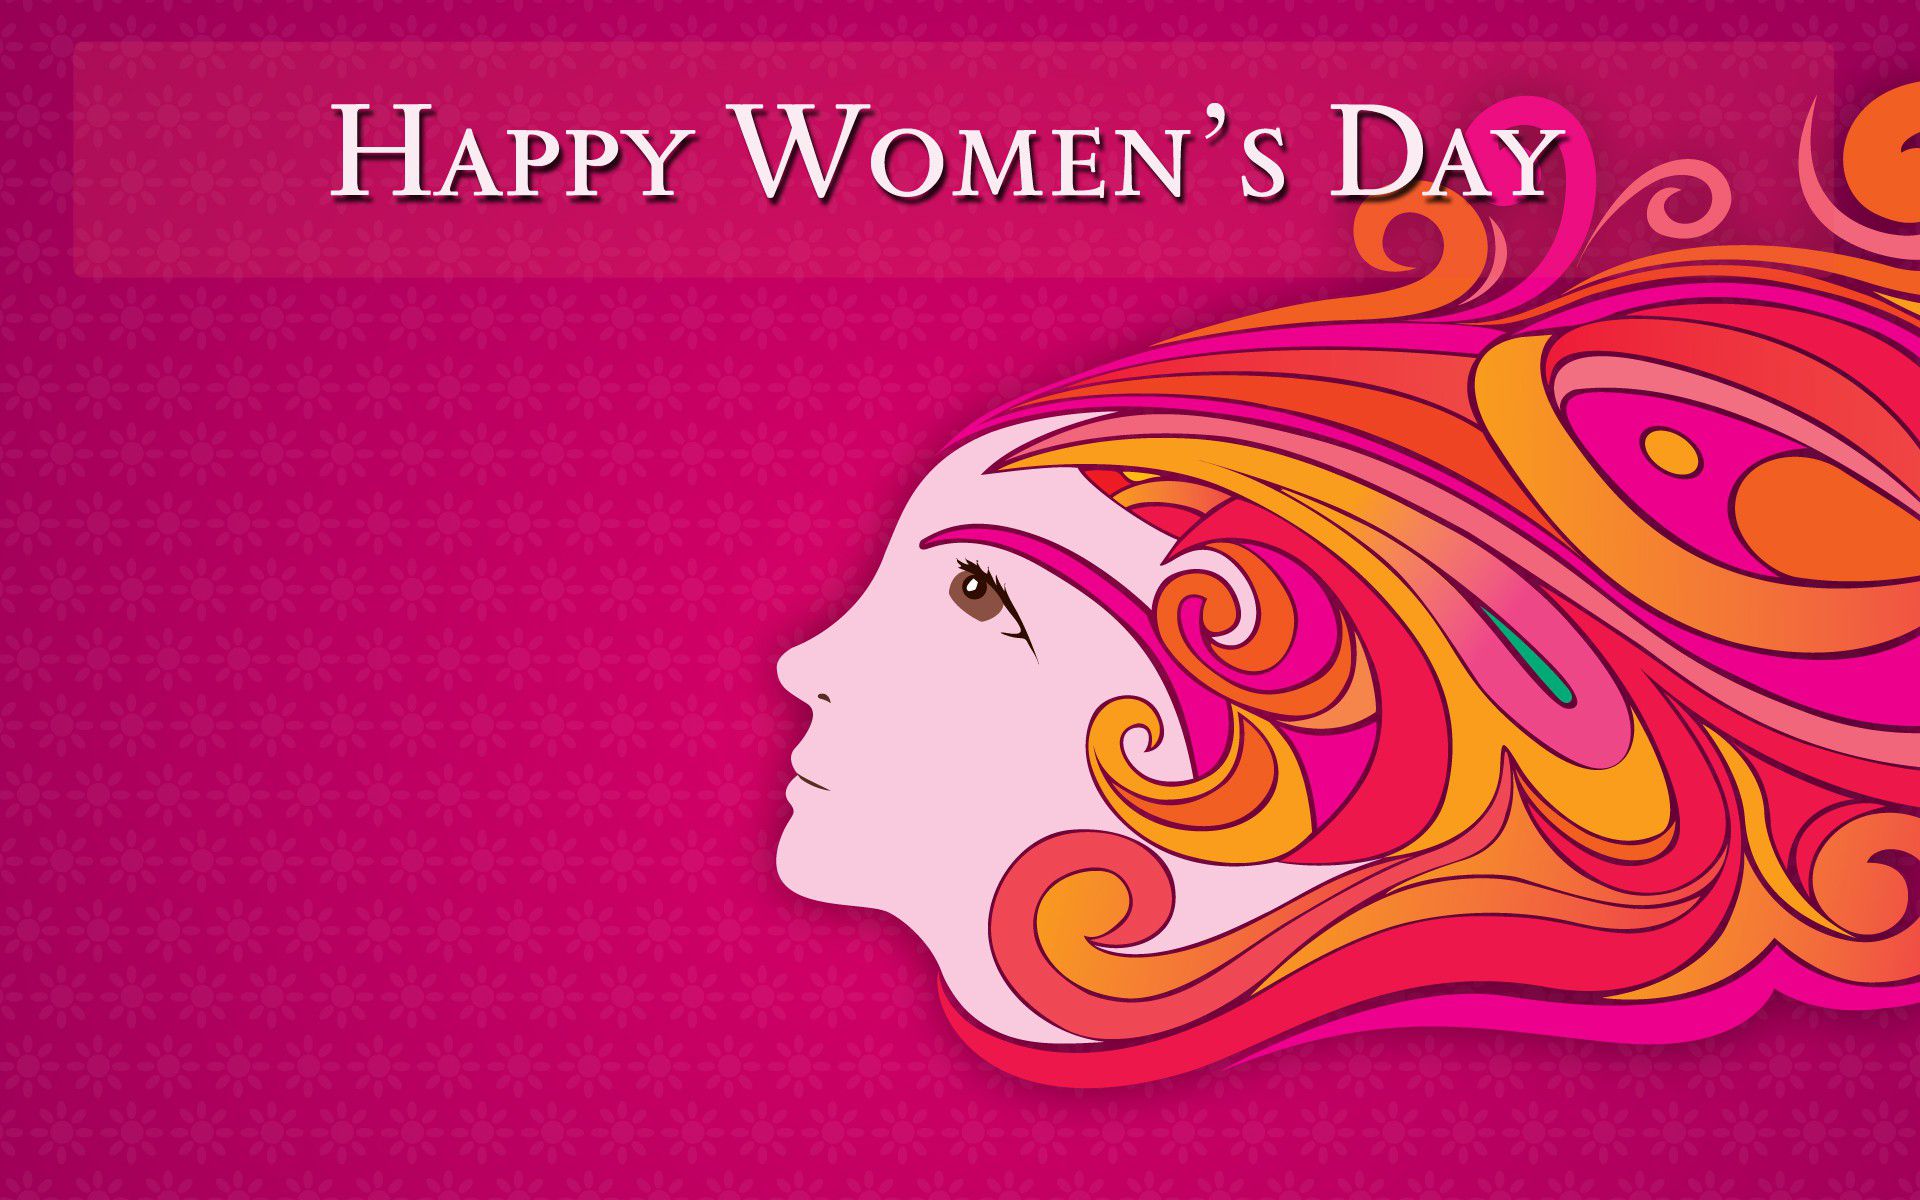 Top 100 Happy Women's Day Free HD Wallpapers & Images 2020